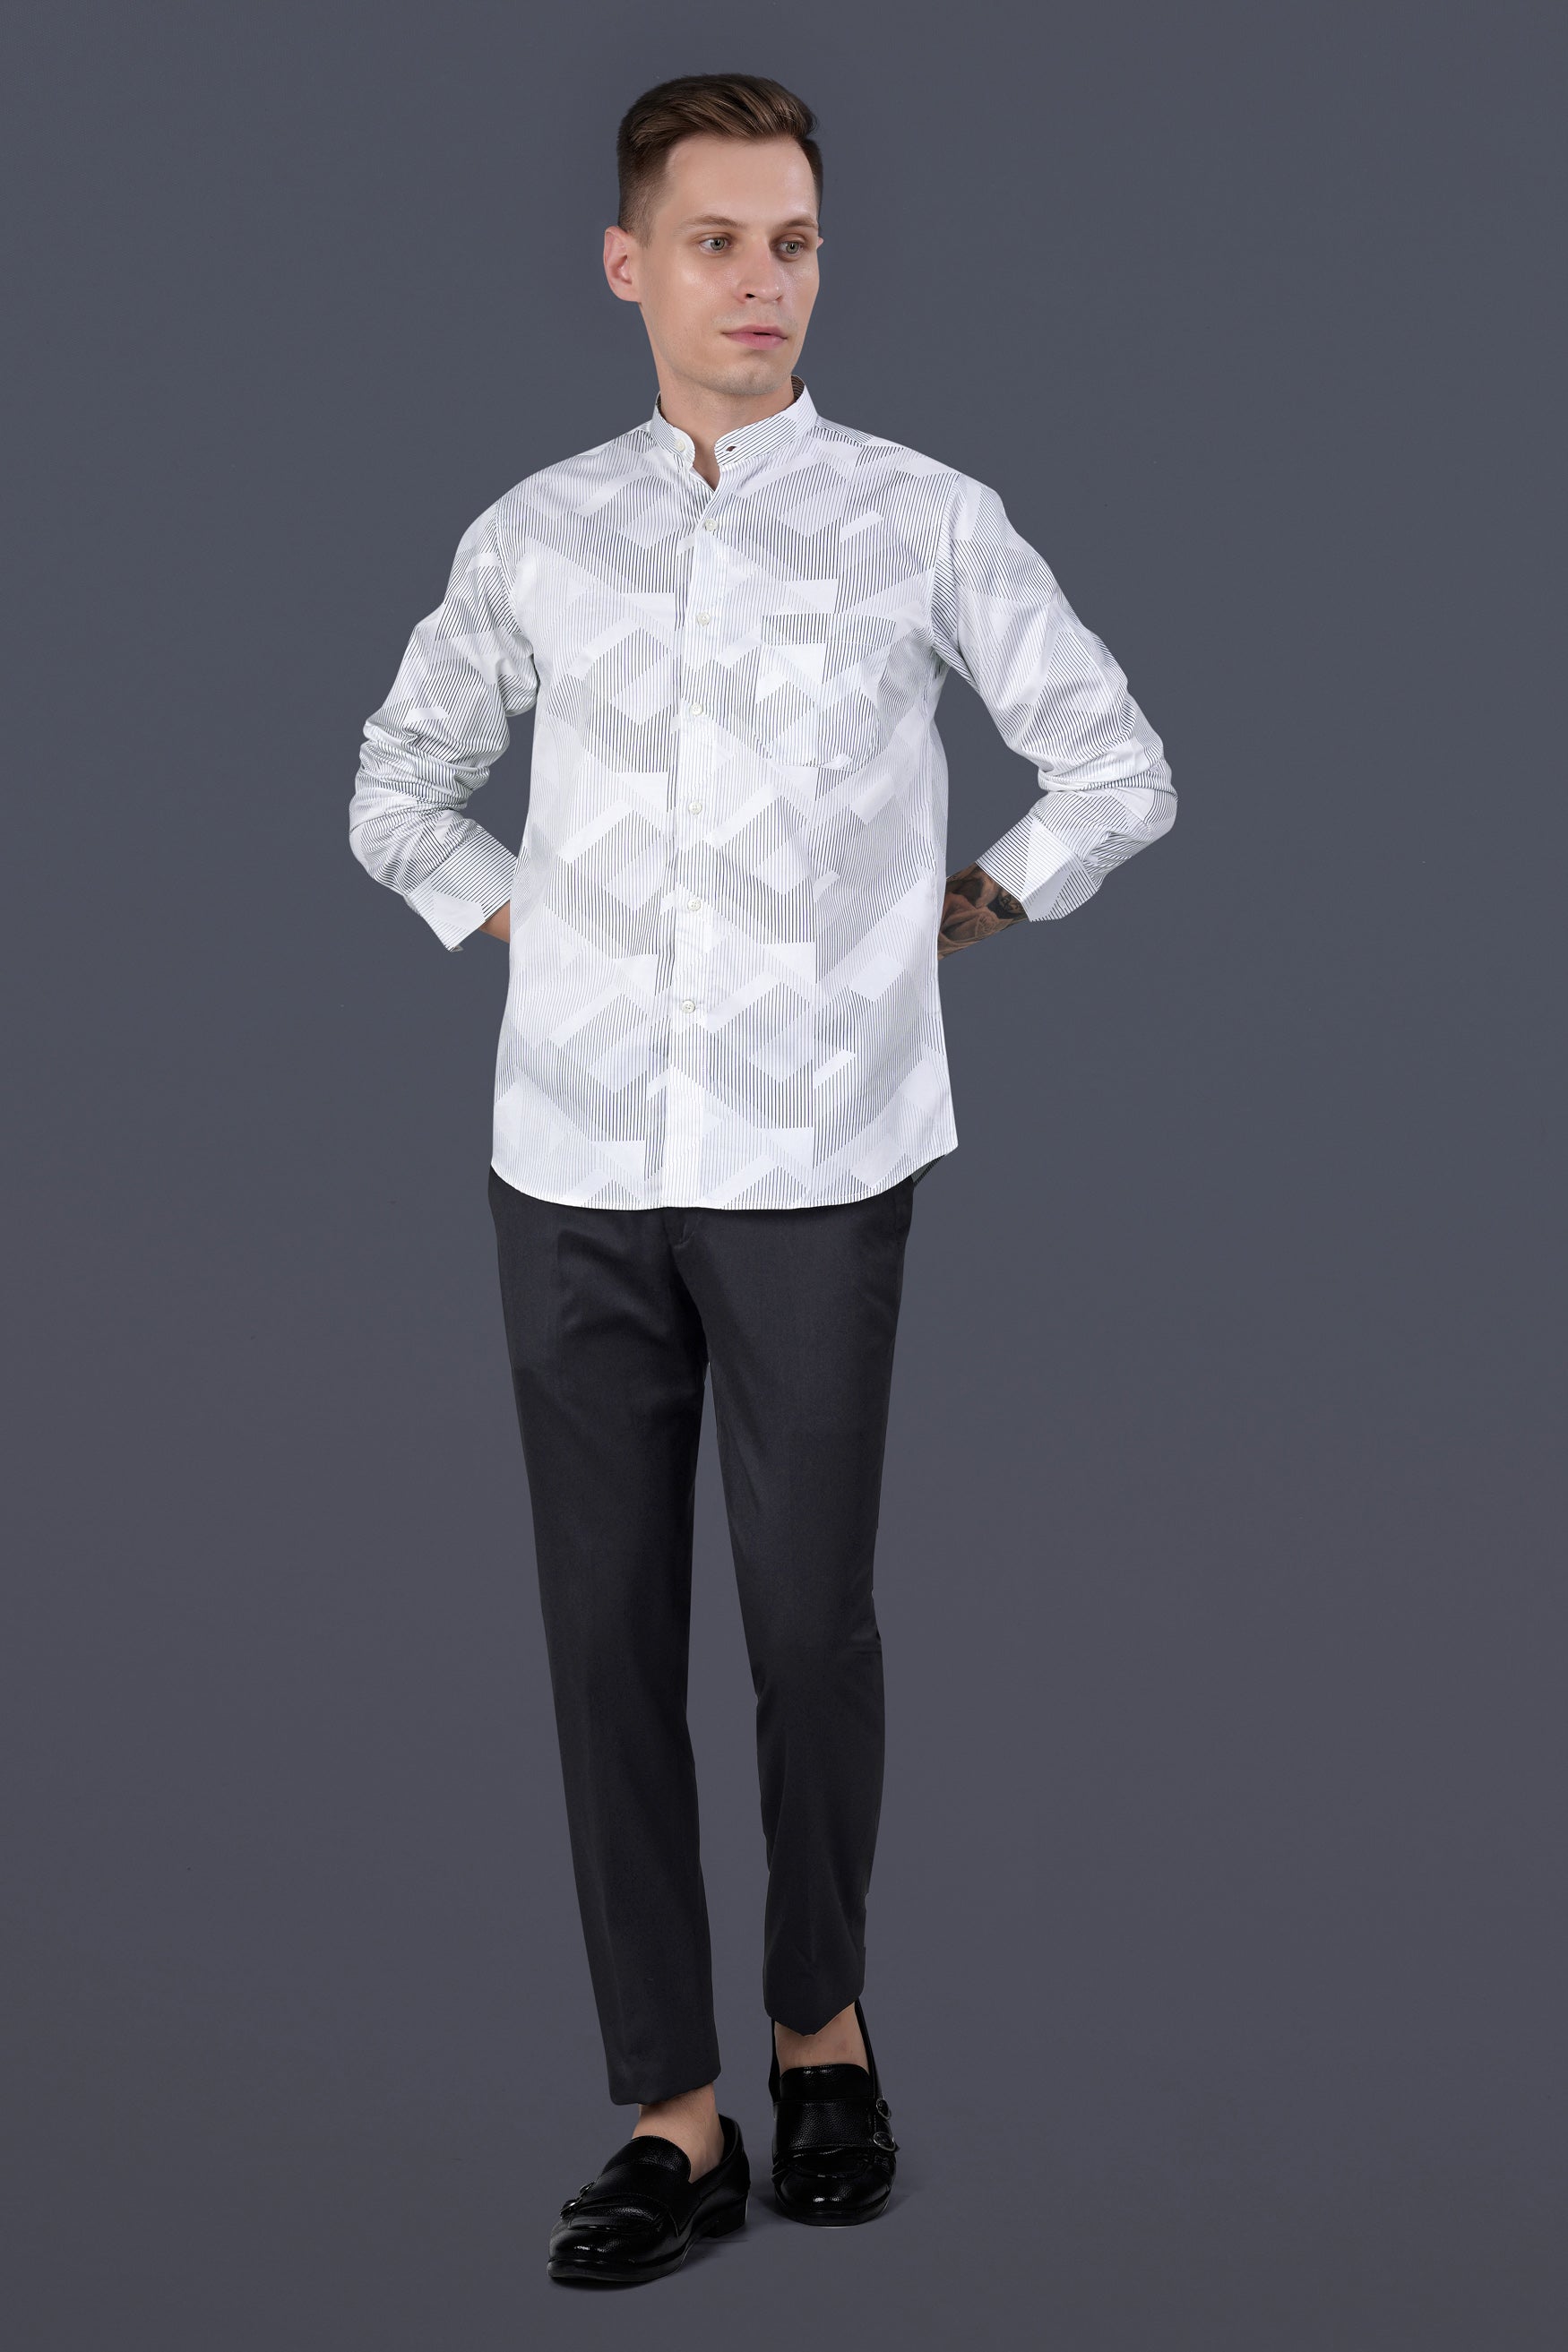 Bright White and Black Abstract Lines Printed Subtle Sheen Super Soft Premium Cotton Shirt